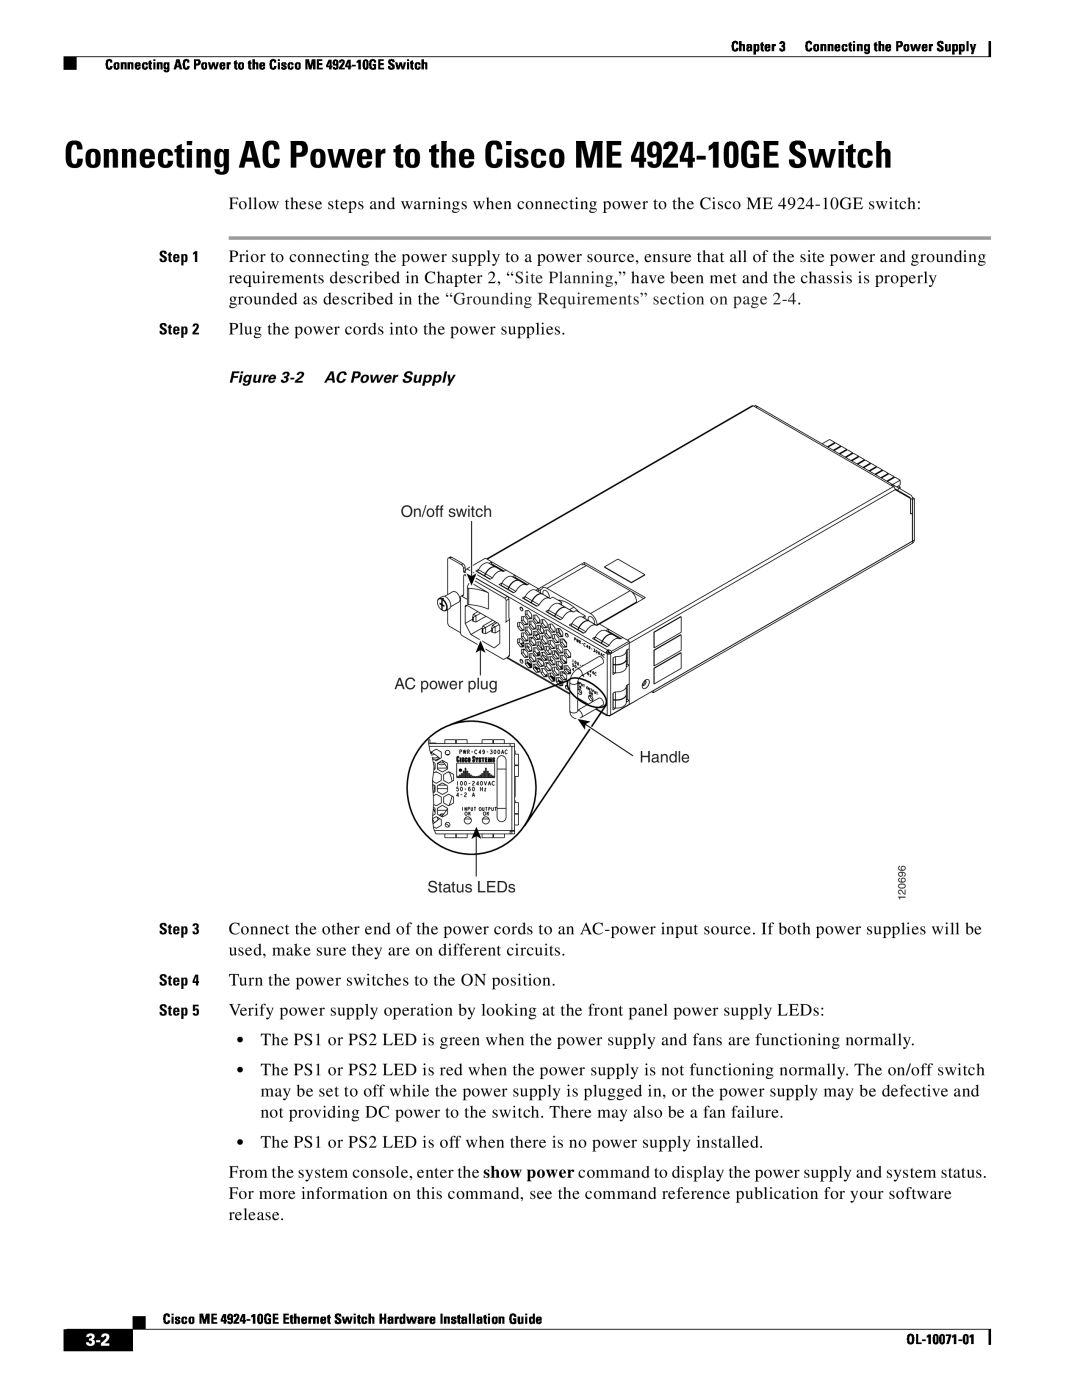 Cisco Systems manual Connecting AC Power to the Cisco ME 4924-10GE Switch 